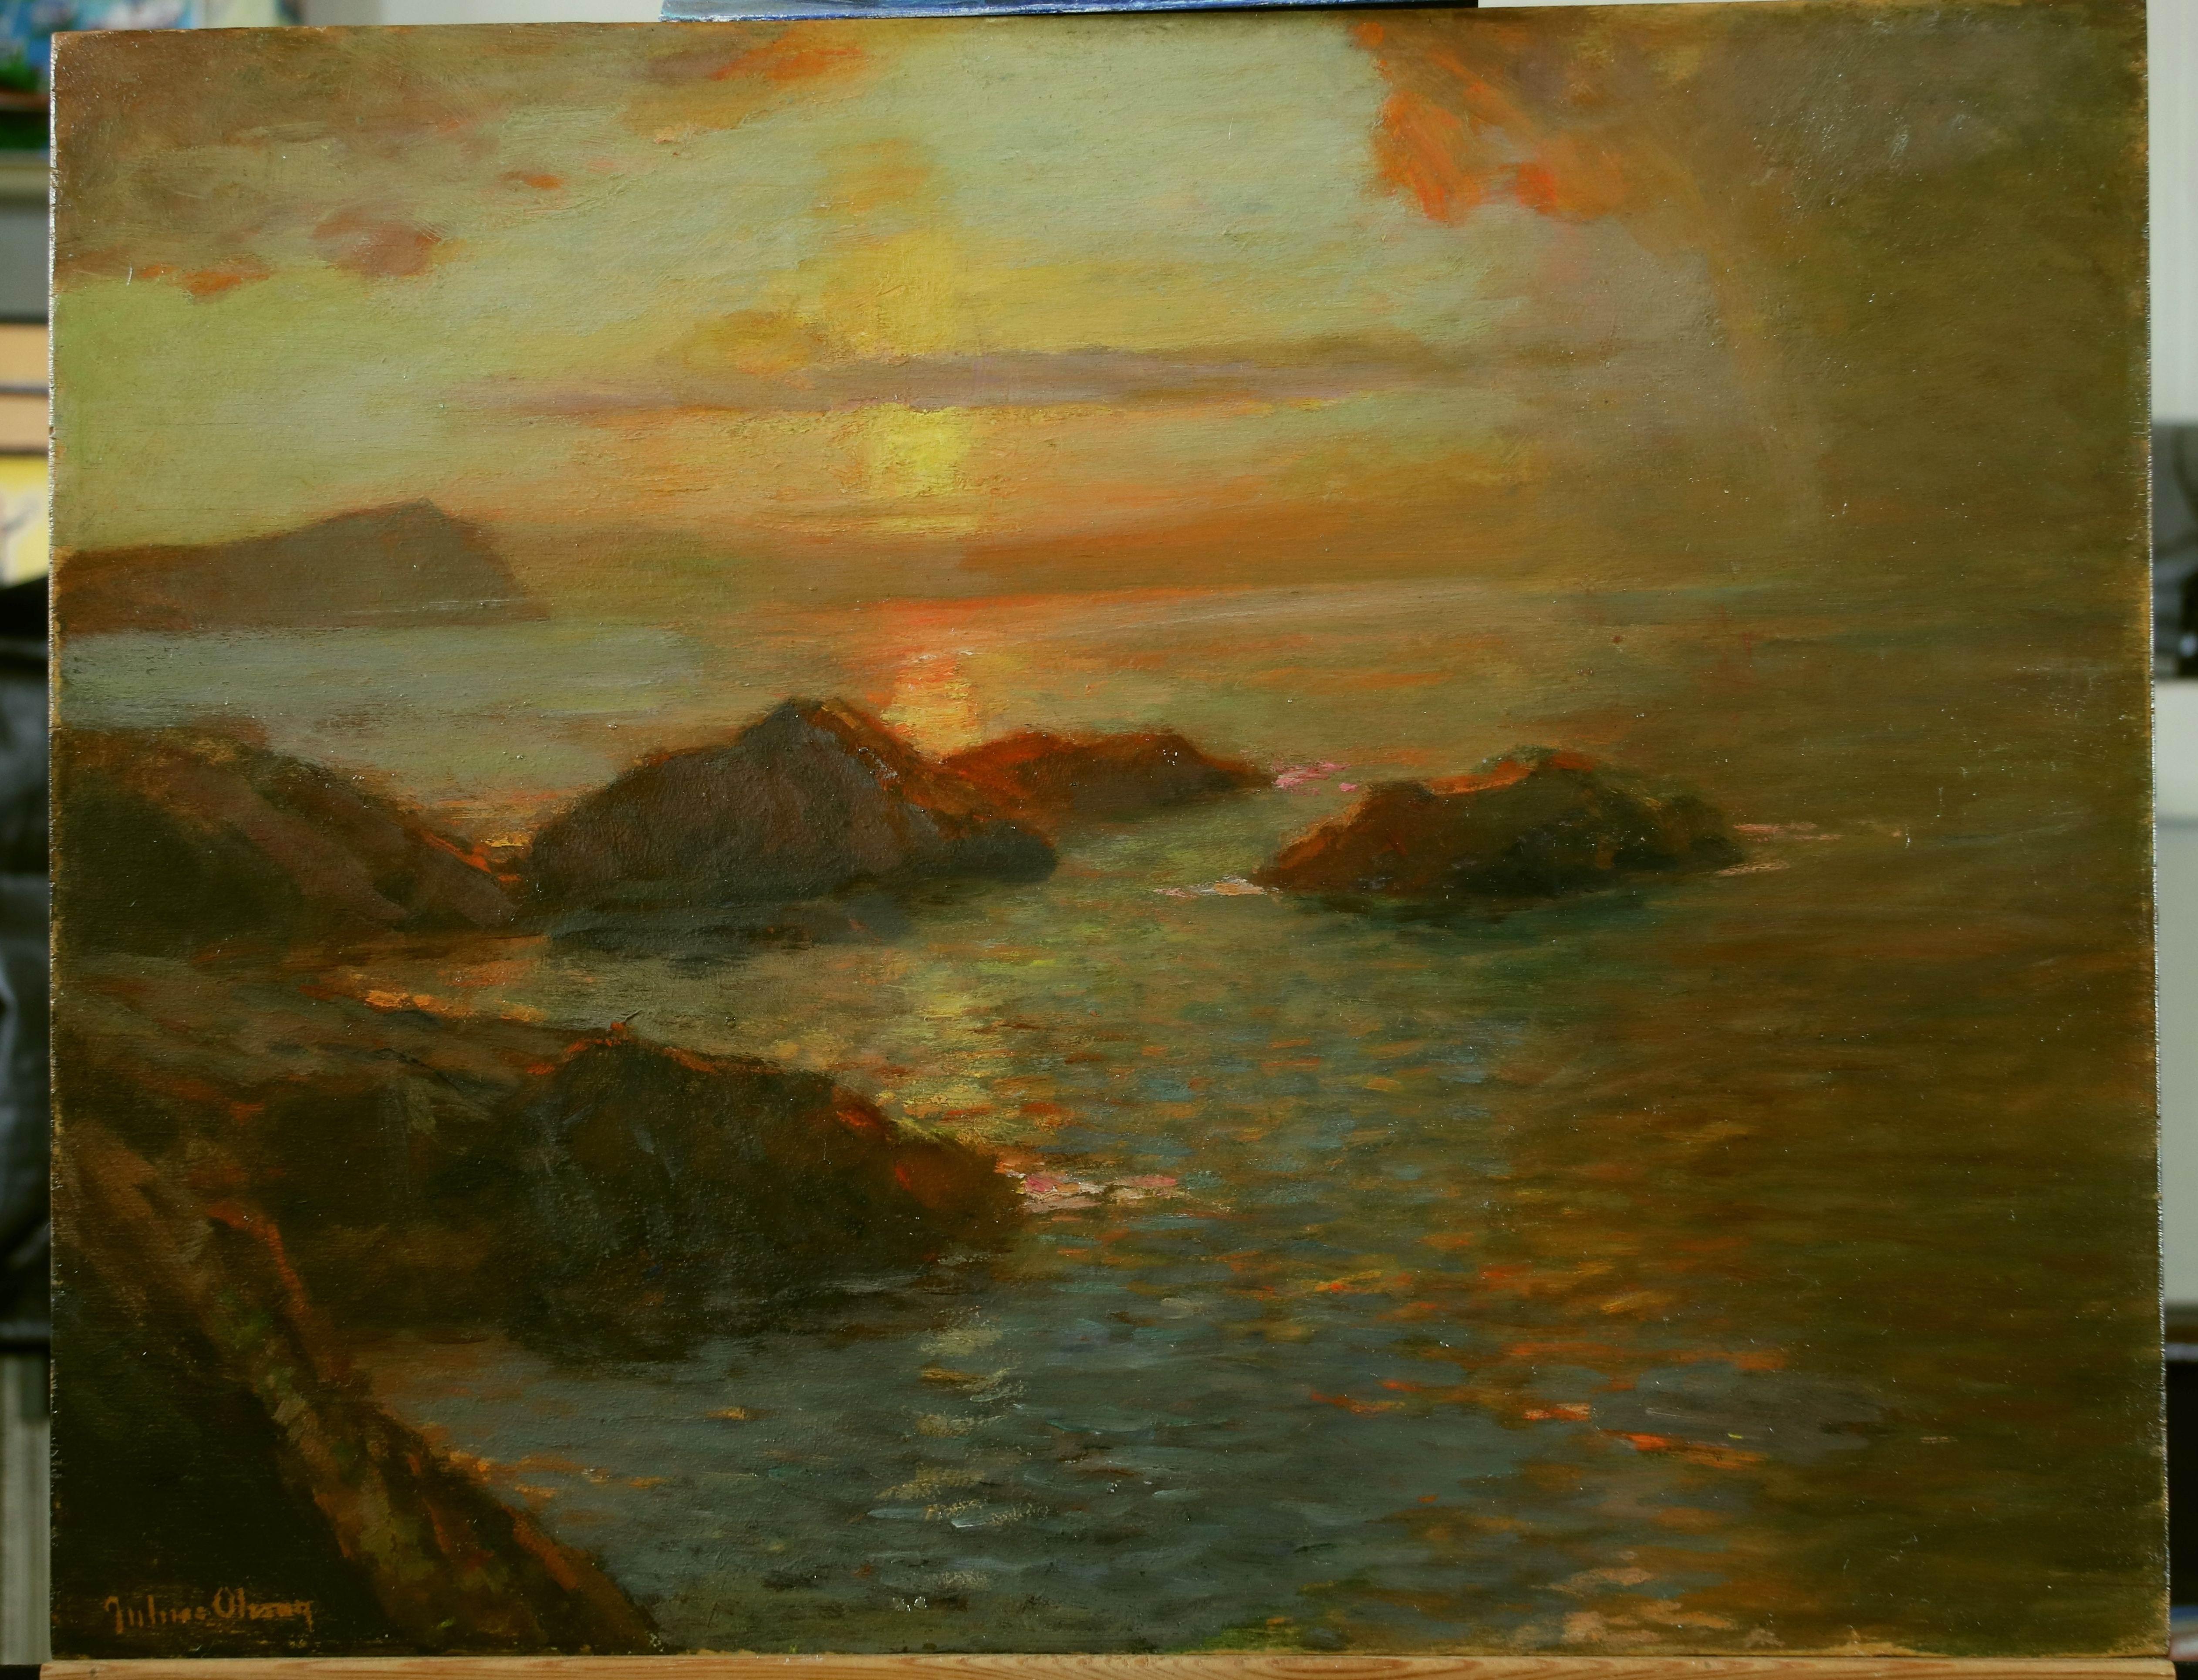 Bundoran Bay, County Donegal Ireland - Sea with glowing hues at Dusk Oil paints - Art by Julius Olsson 